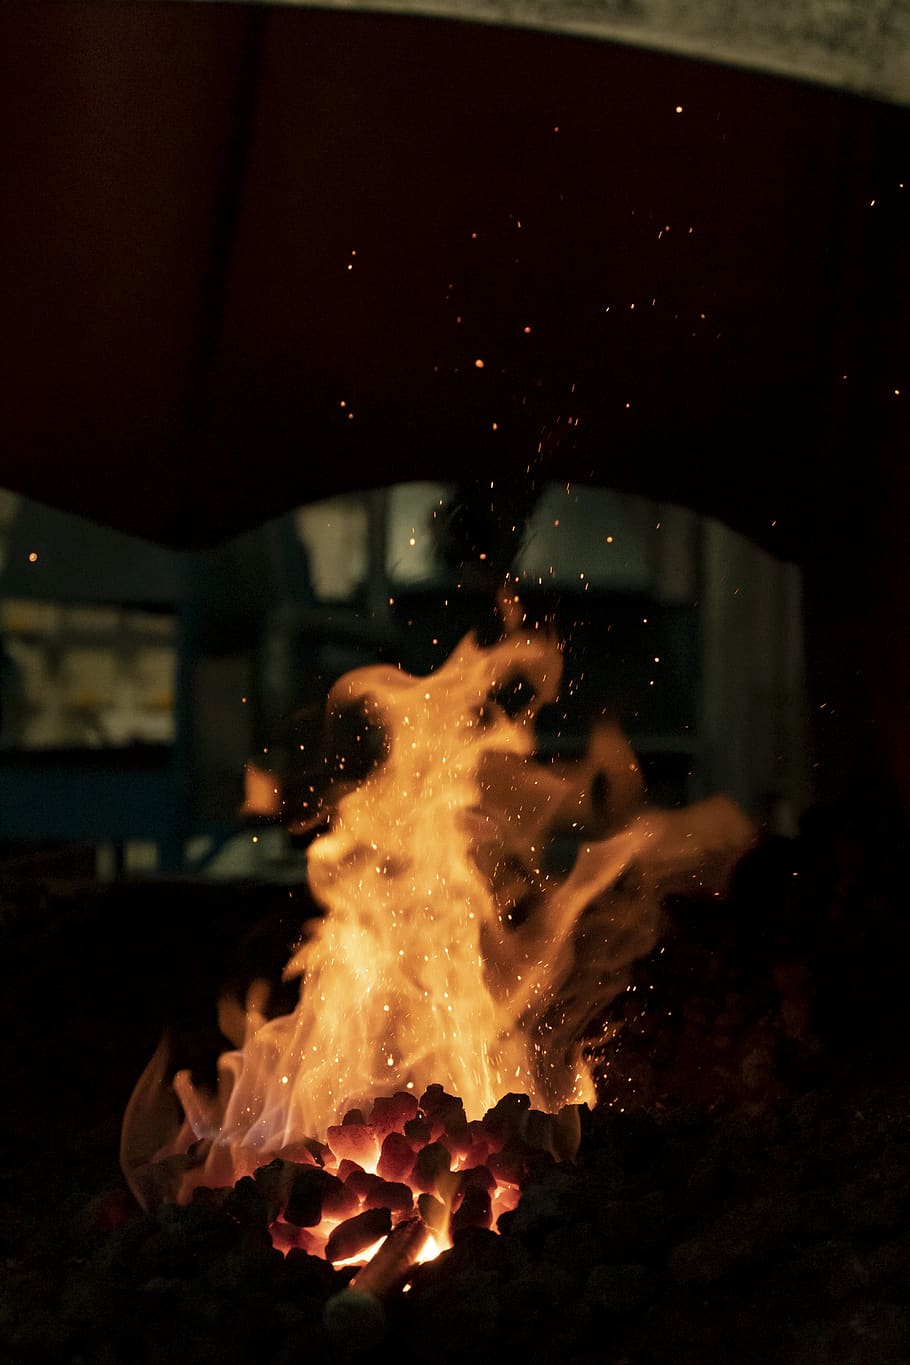 fire, flame, bonfire, glass, goblet, night life, ankle, animal